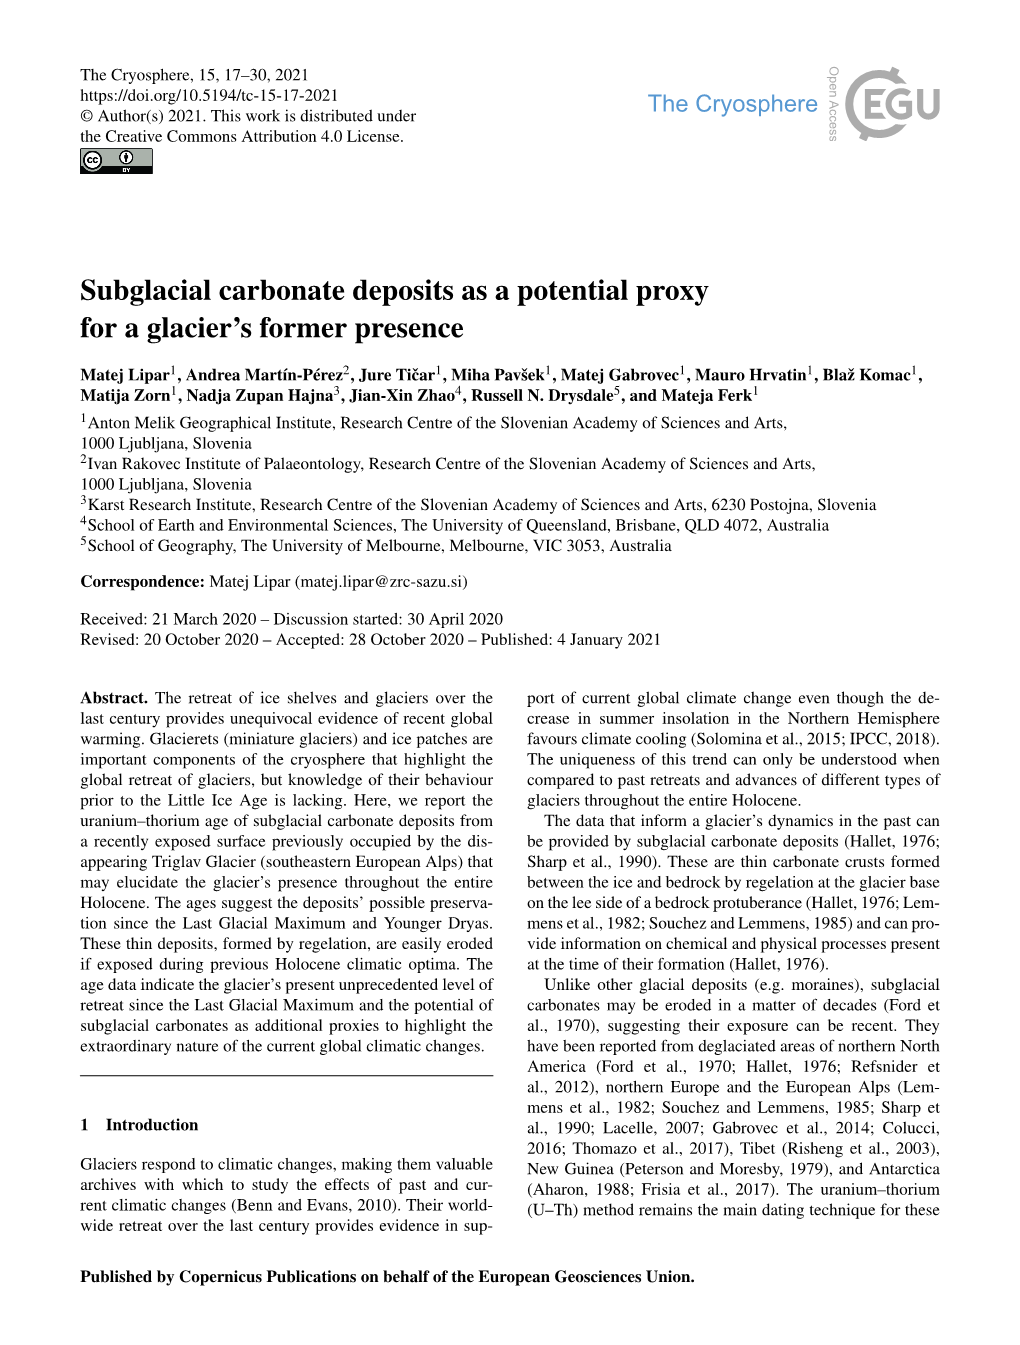 Article Is Available On- Bajo, P., Hellstrom, J., Frisia, S., Drysdale, R., Black, J., Wood- Line At